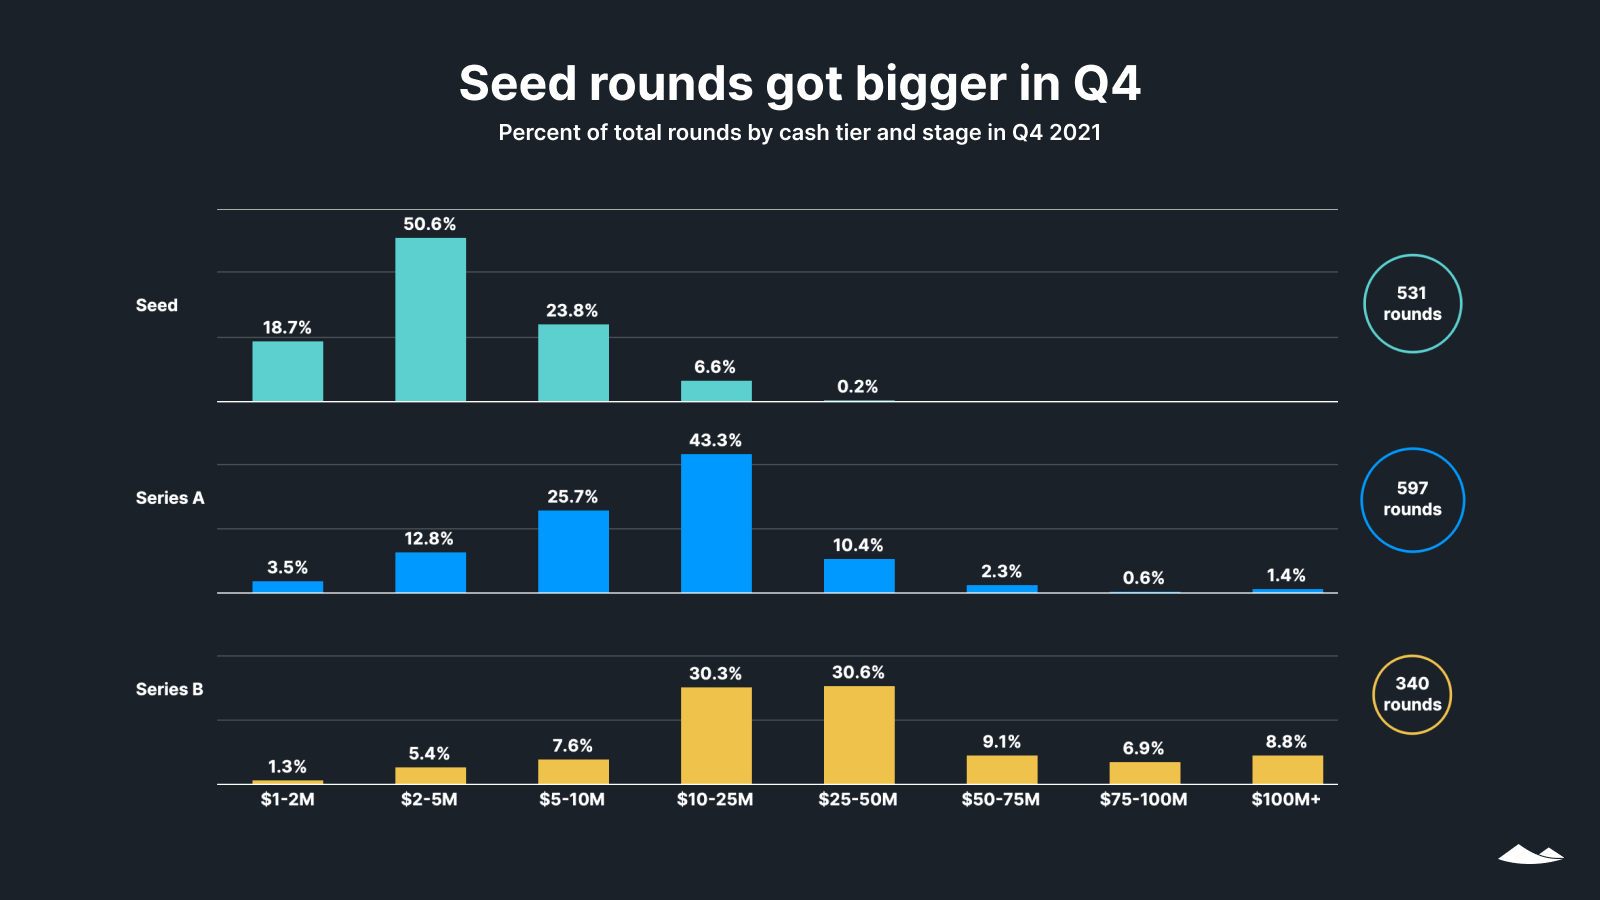 Seed rounds got bigger in Q4